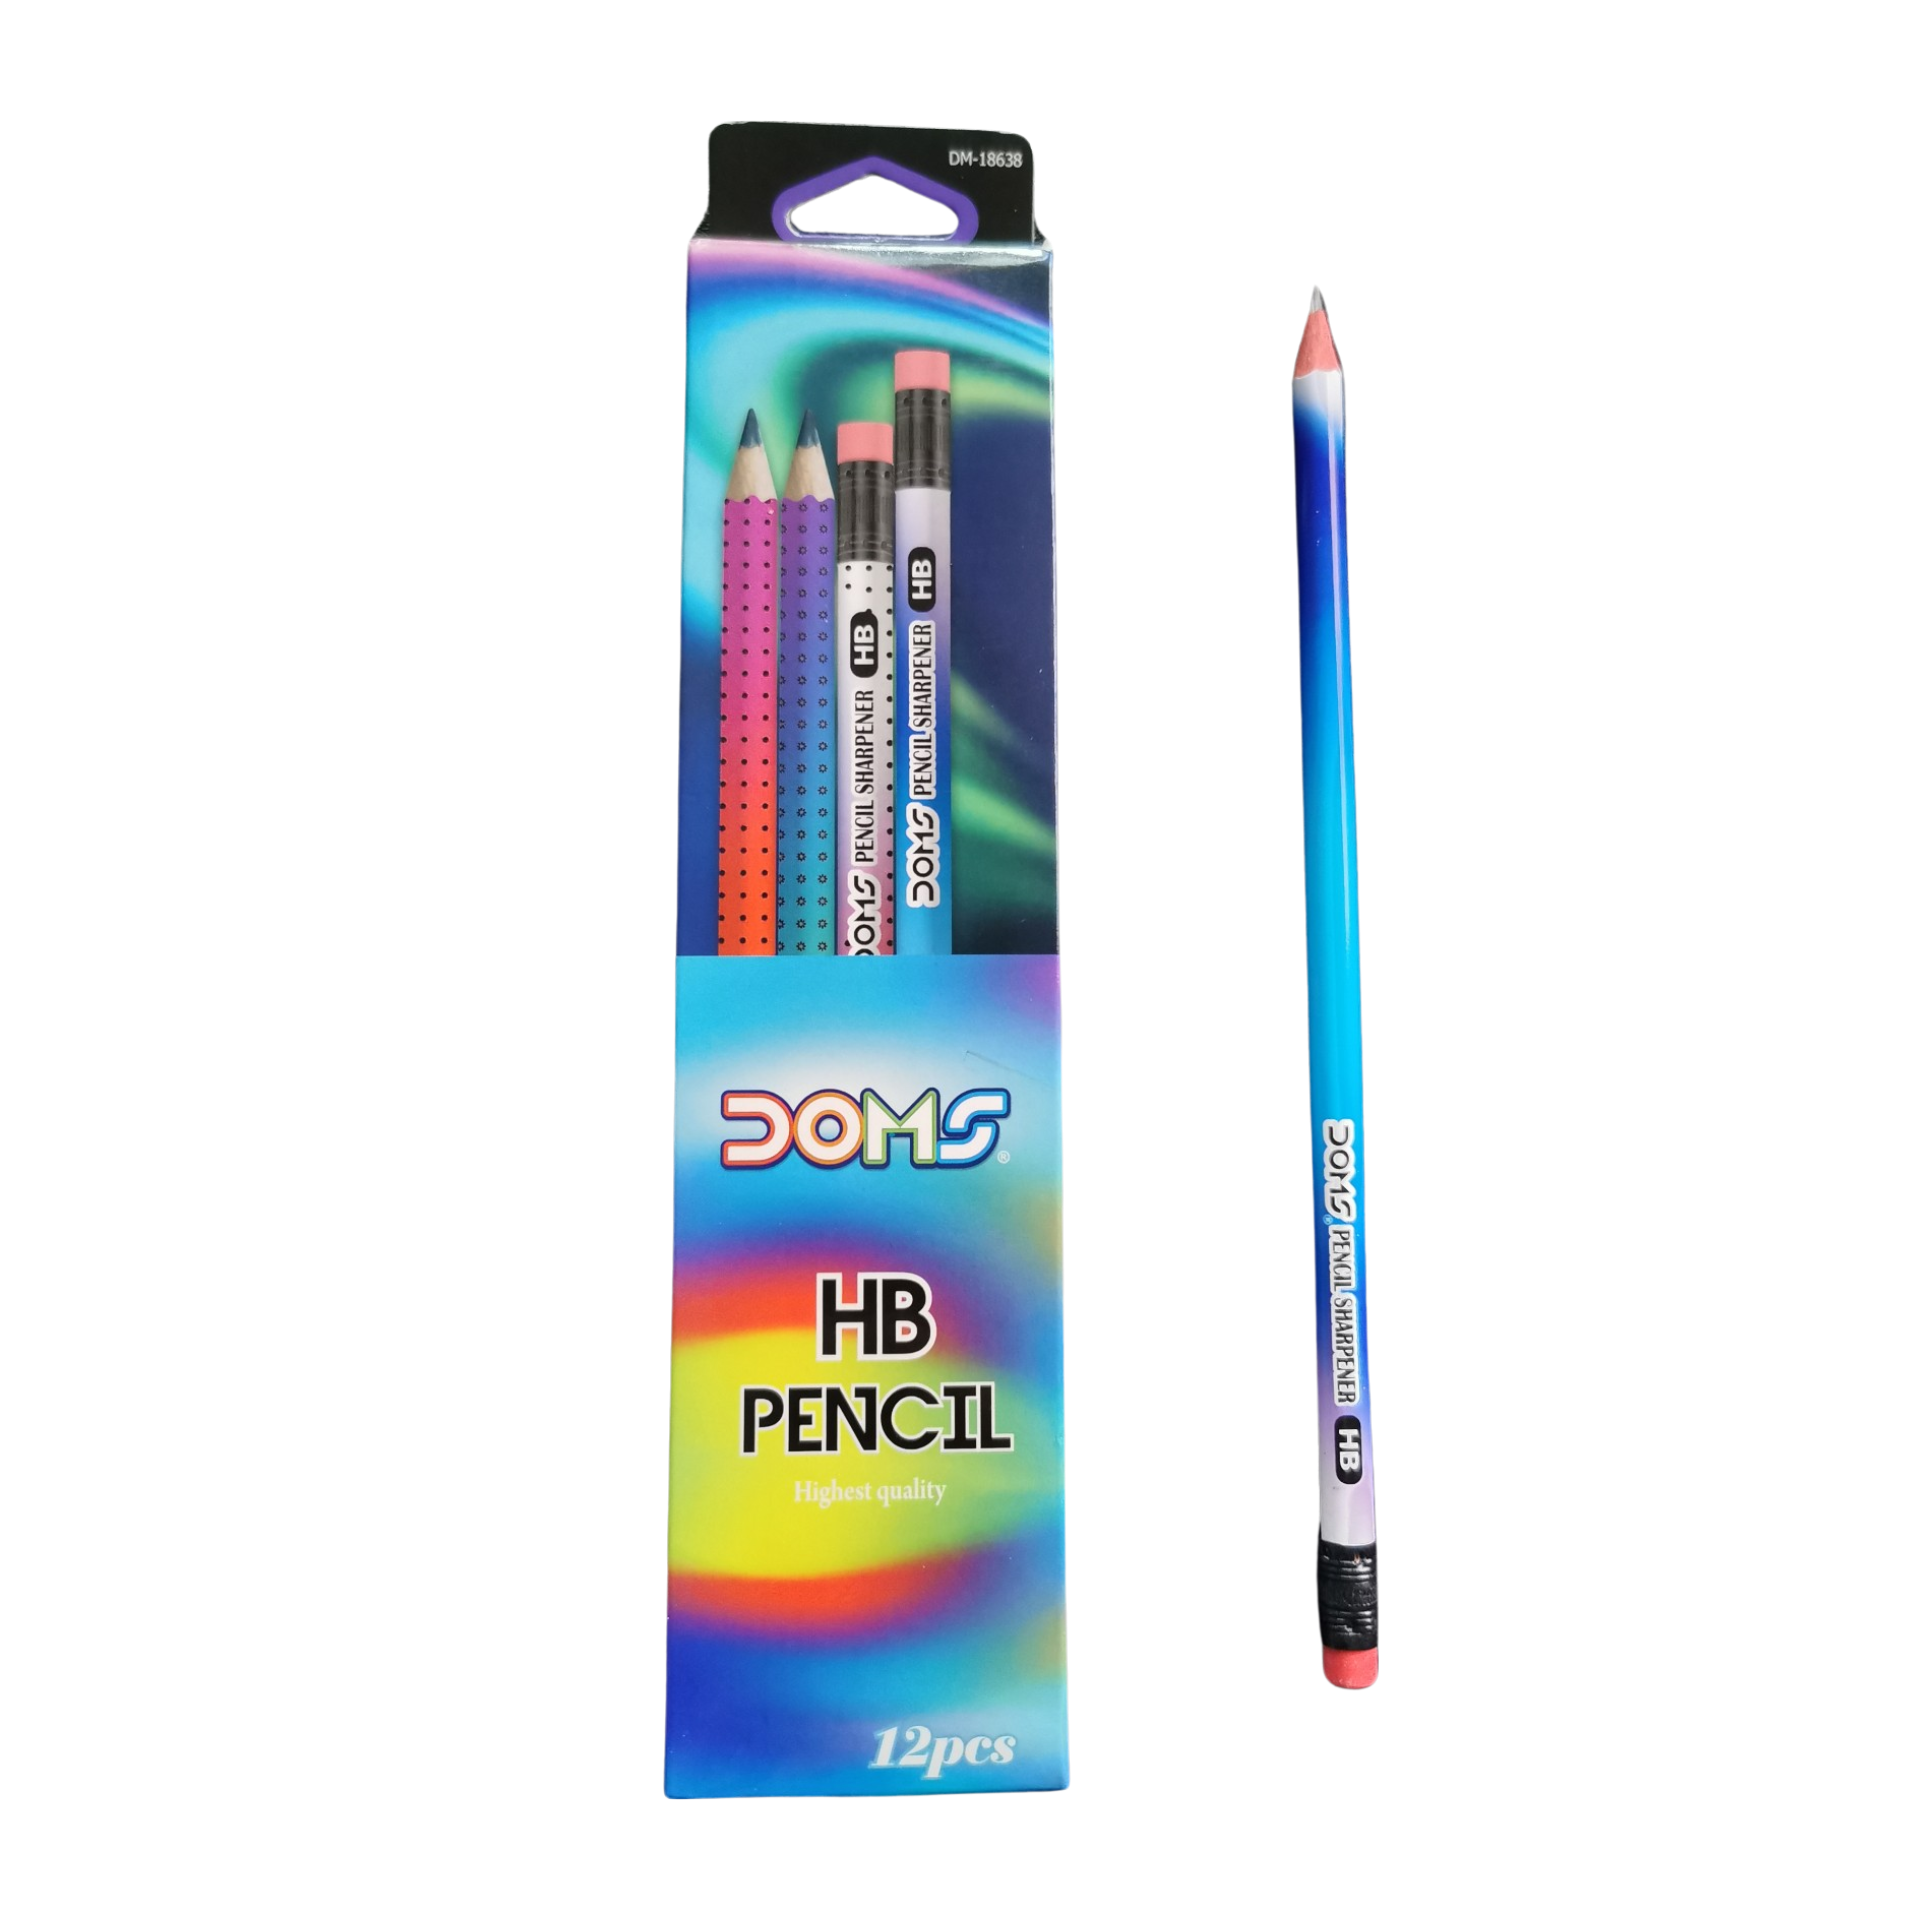 DOMS HB pencil , Highest Quality, (Pack of 12)